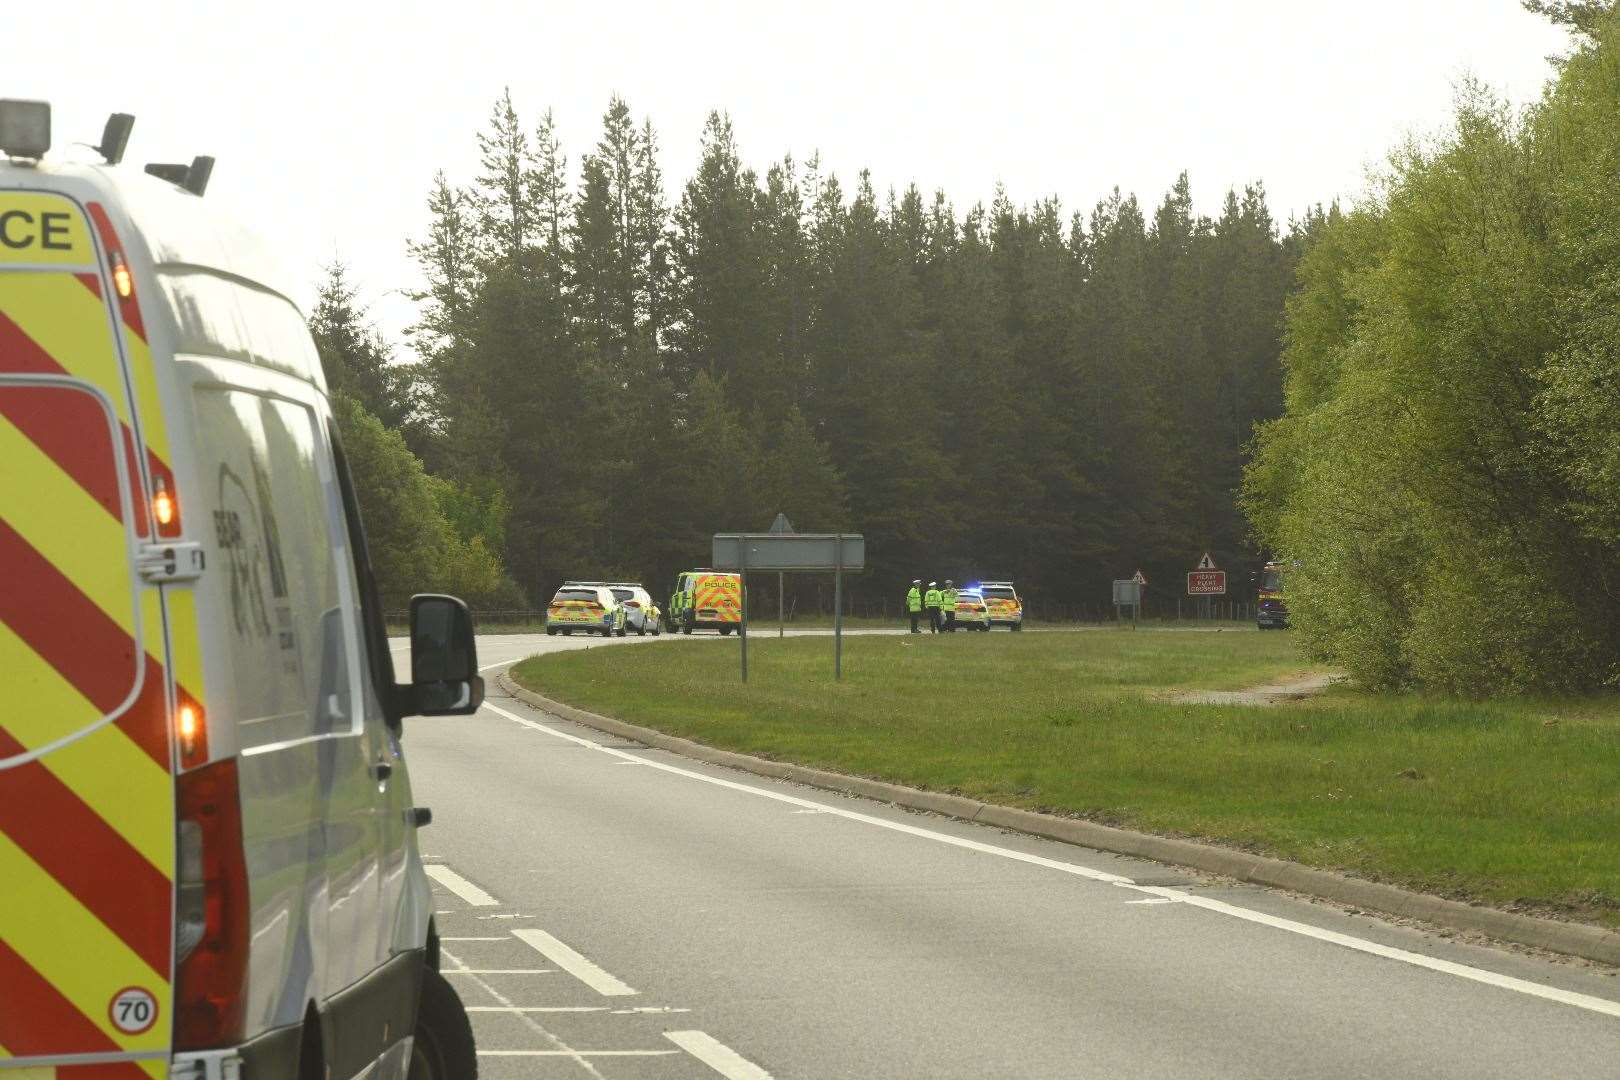 The accident scene, from afar, on the A9 south of Inverness.